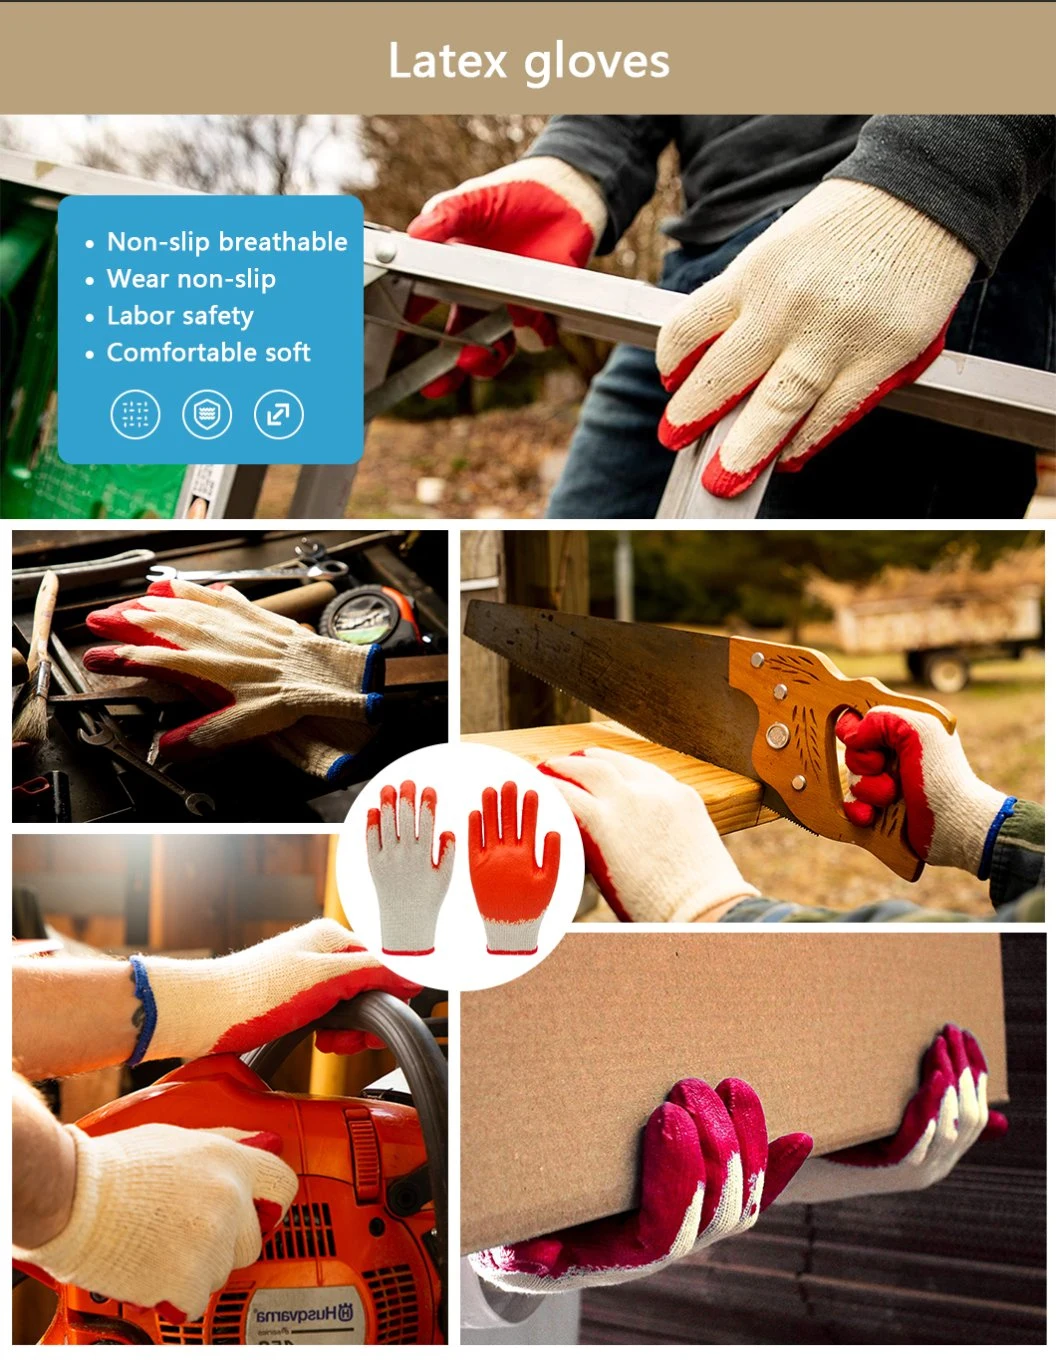 Factoryshop Cotton / Poly Liner Latex / Rubber Non Slip Palm Coated Work Safety Hand Protective Garden Reusable Construction Working Gloves